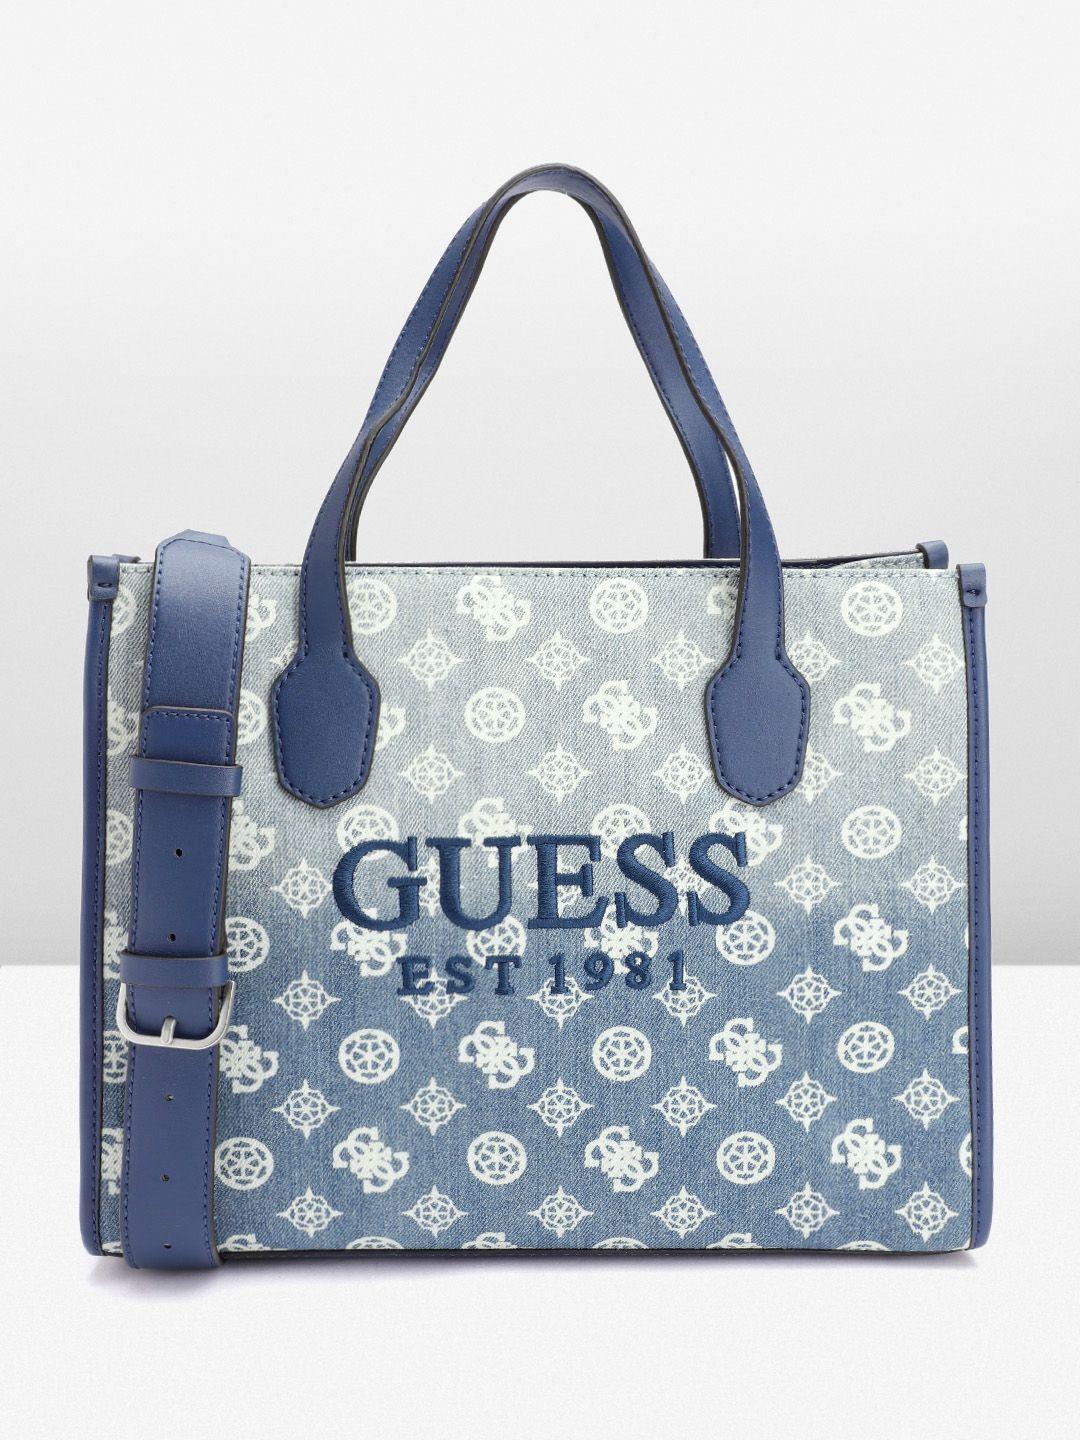 guess women brand logo printed structured denim handheld bag with ombre effect